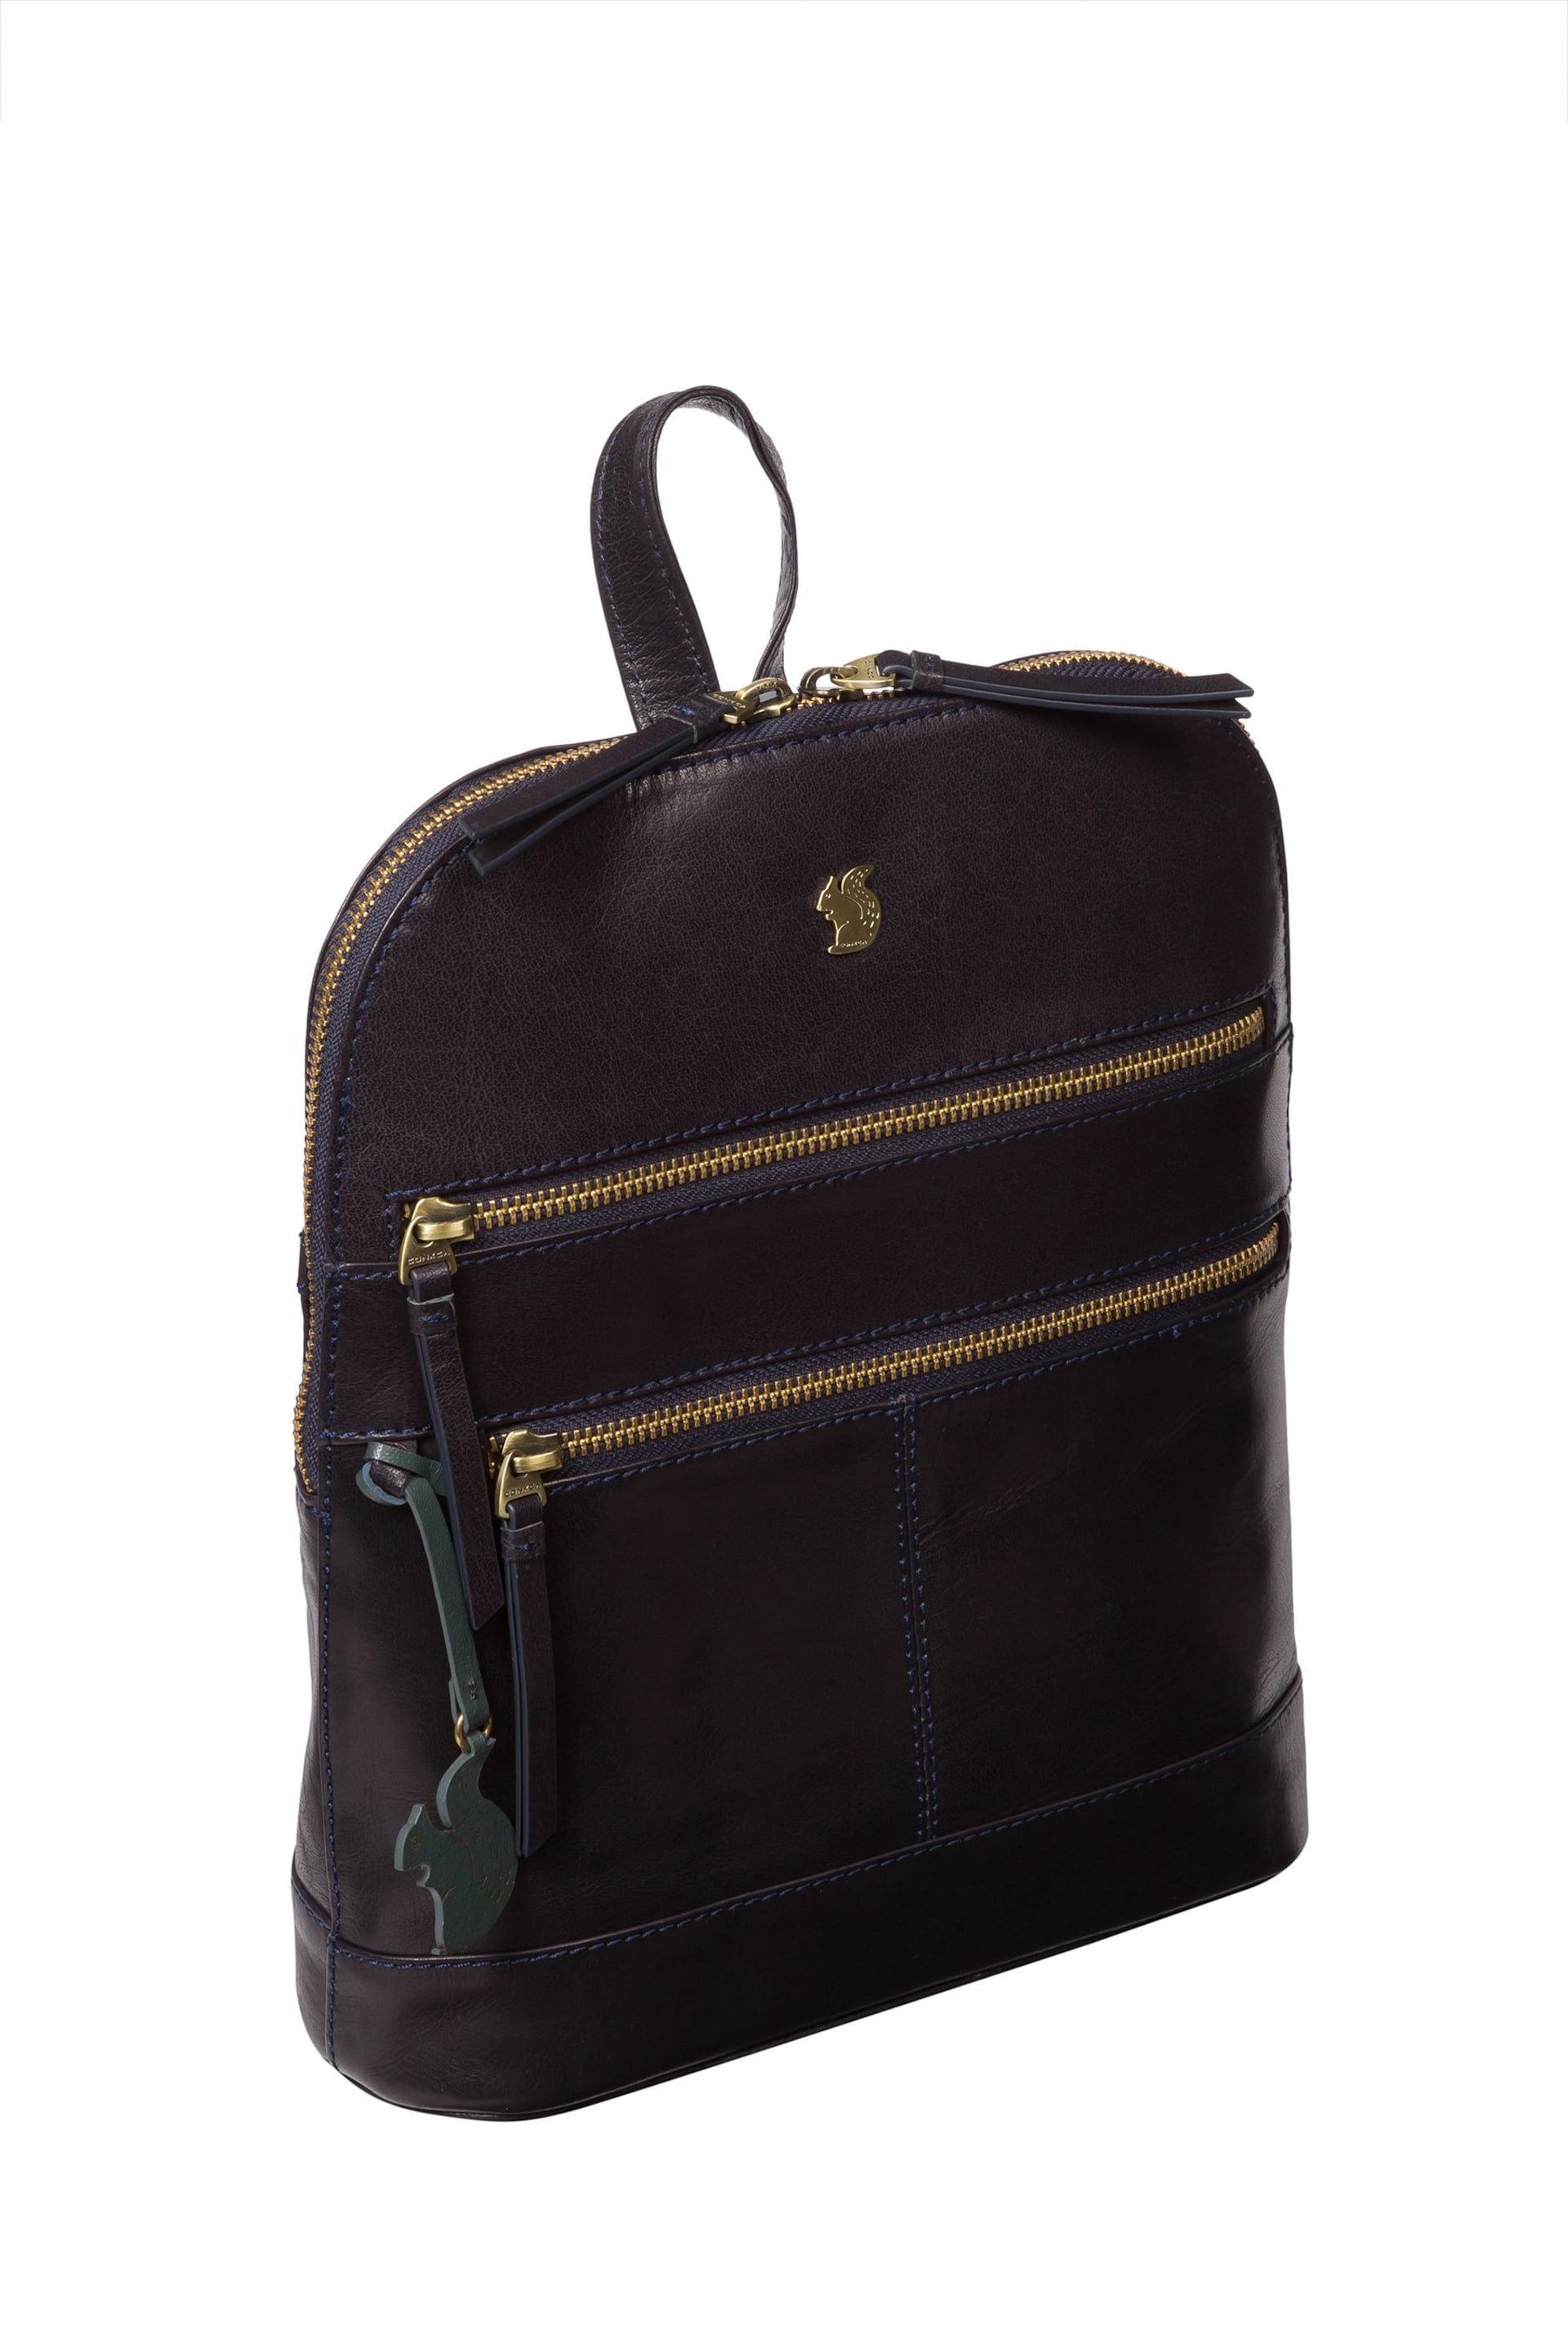 Conkca Francisca Leather Backpack - Image 3 of 6